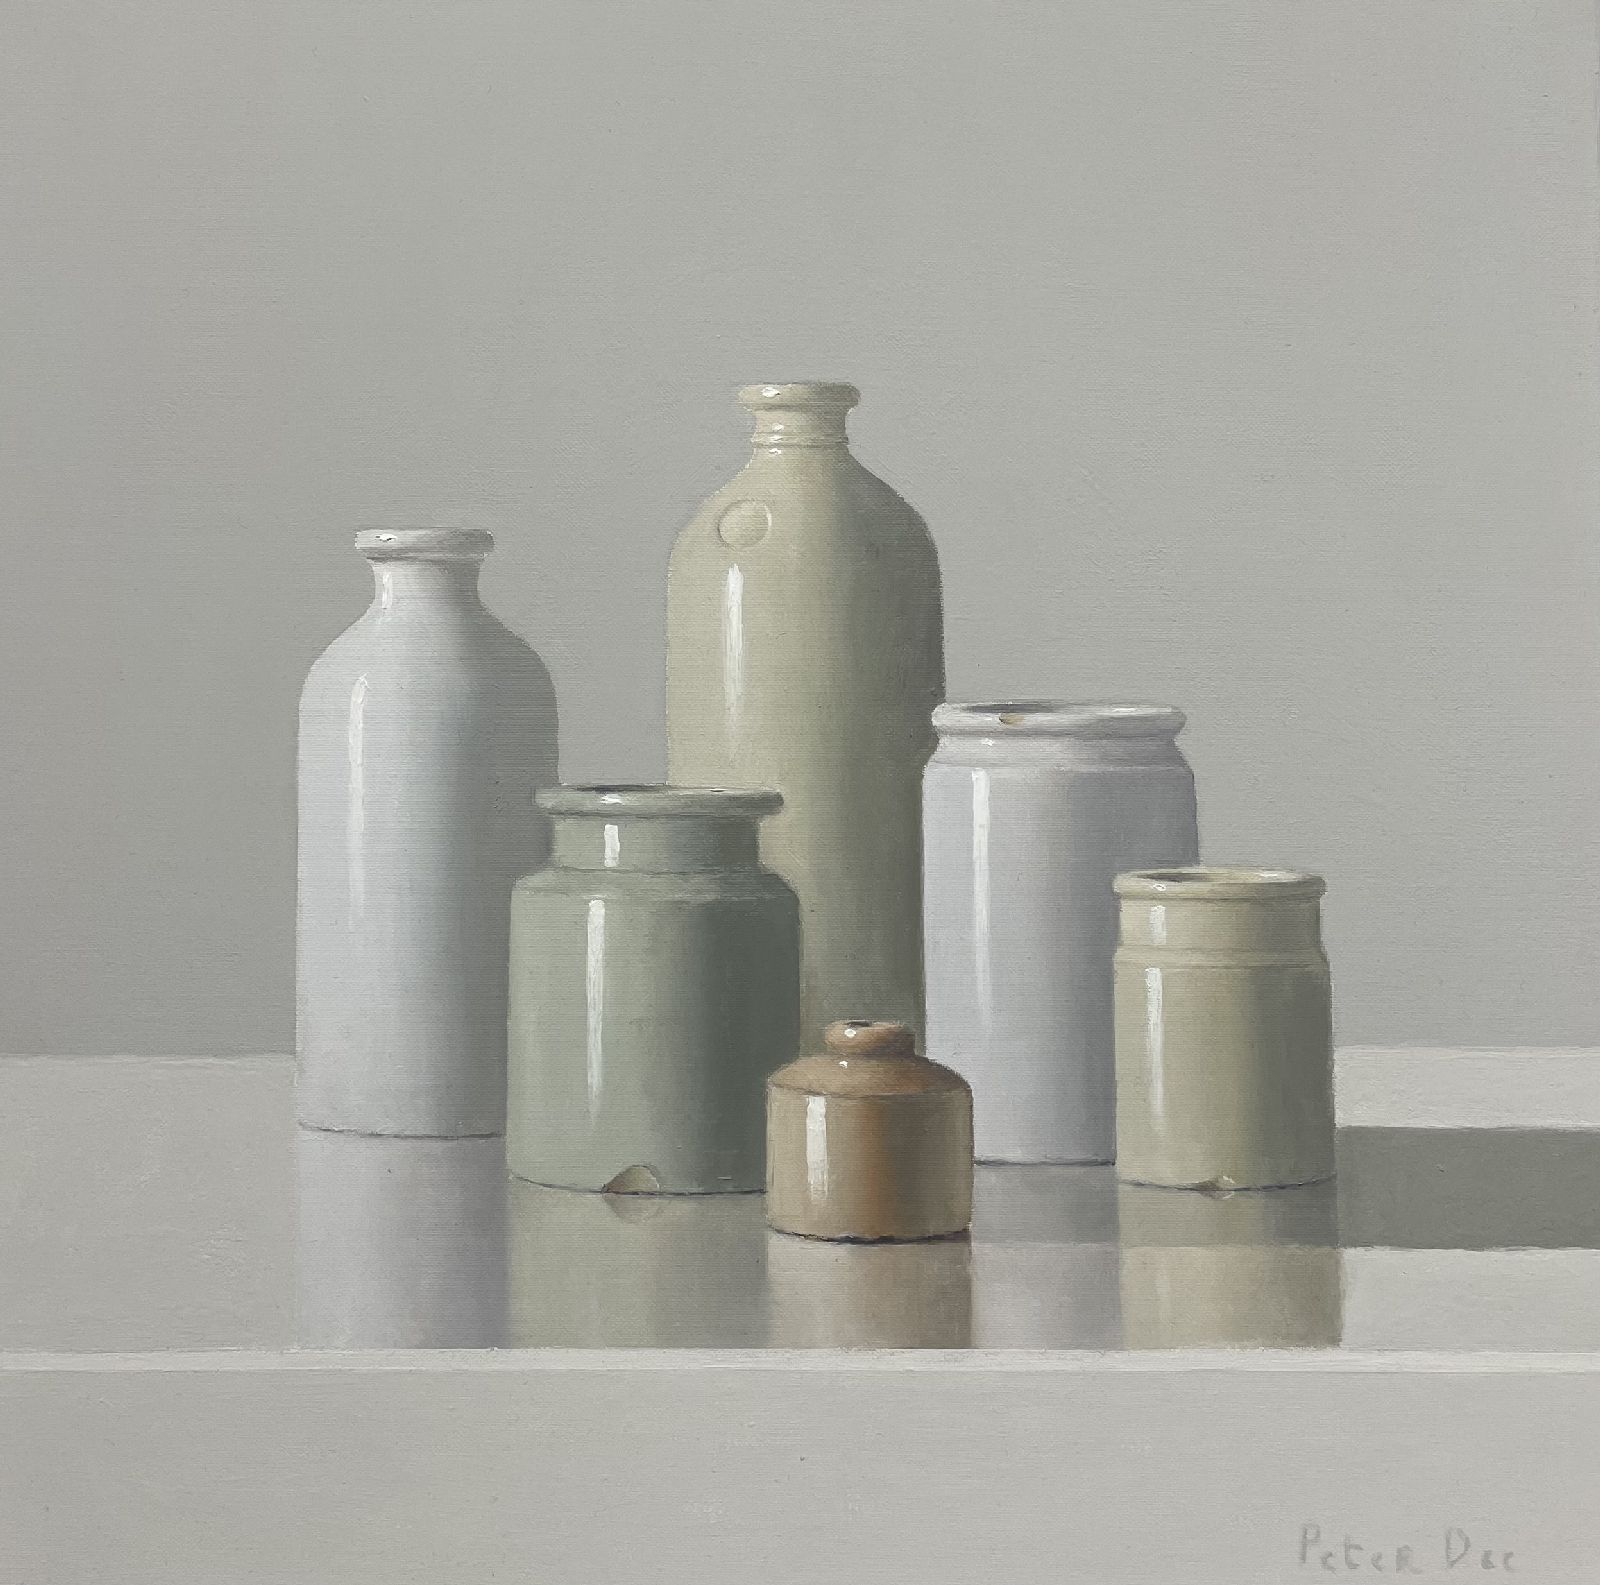 Stoneware Still Life by Peter Dee